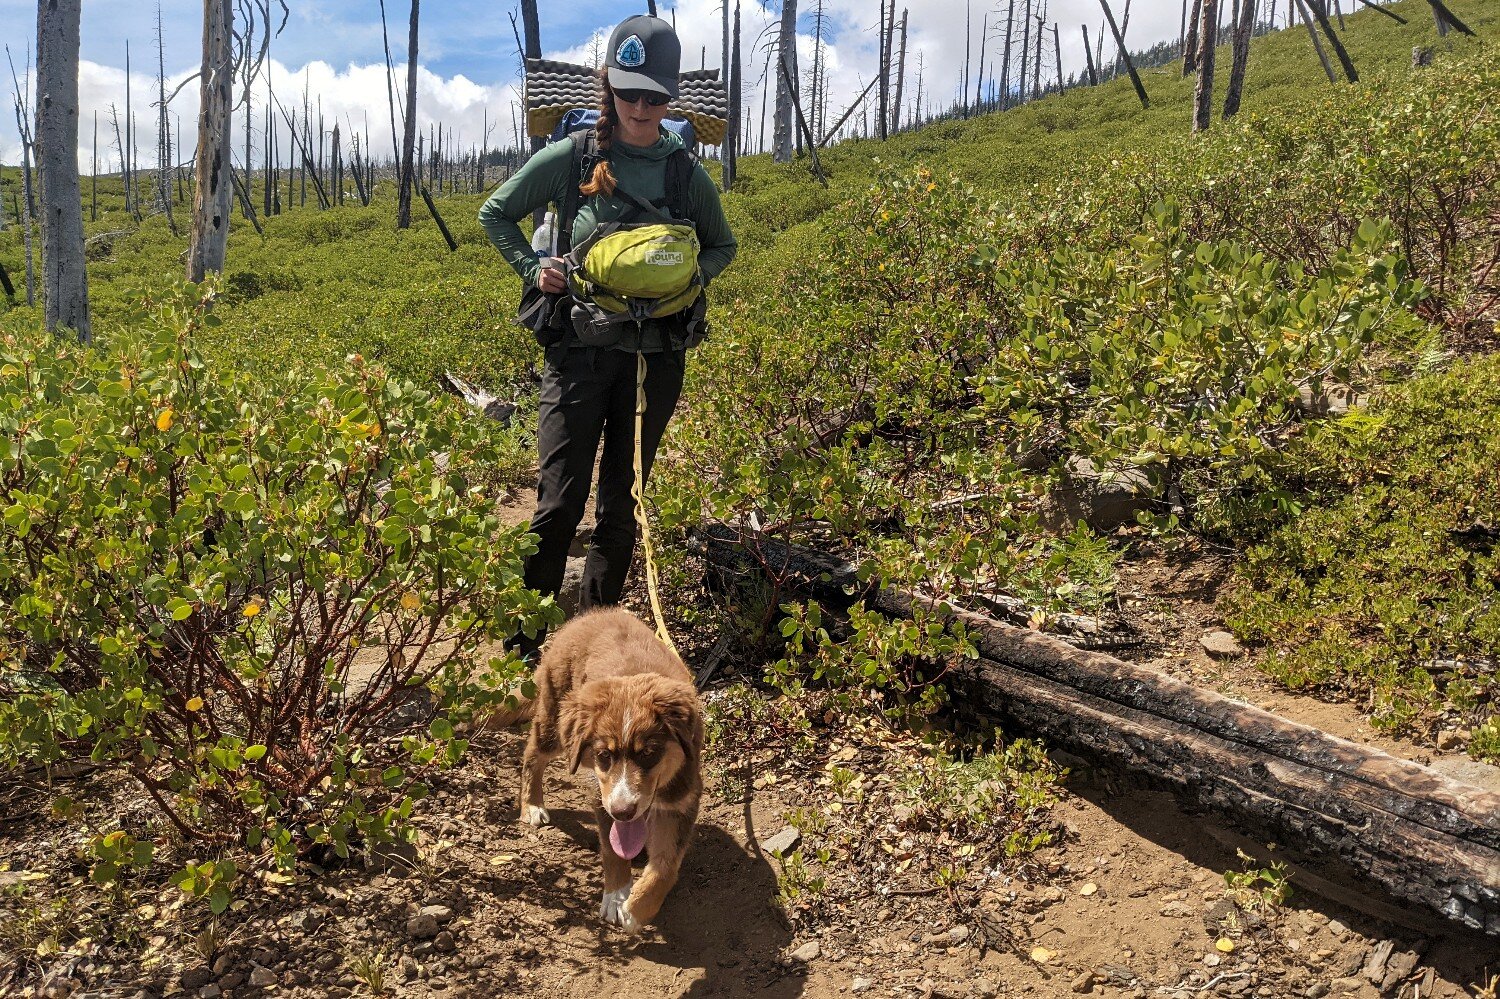 The small capacity Outward Hound Daypak is good for getting young dogs used to carrying a backpack, but it’s important to give them a break from wearing it every once in a while on the trail